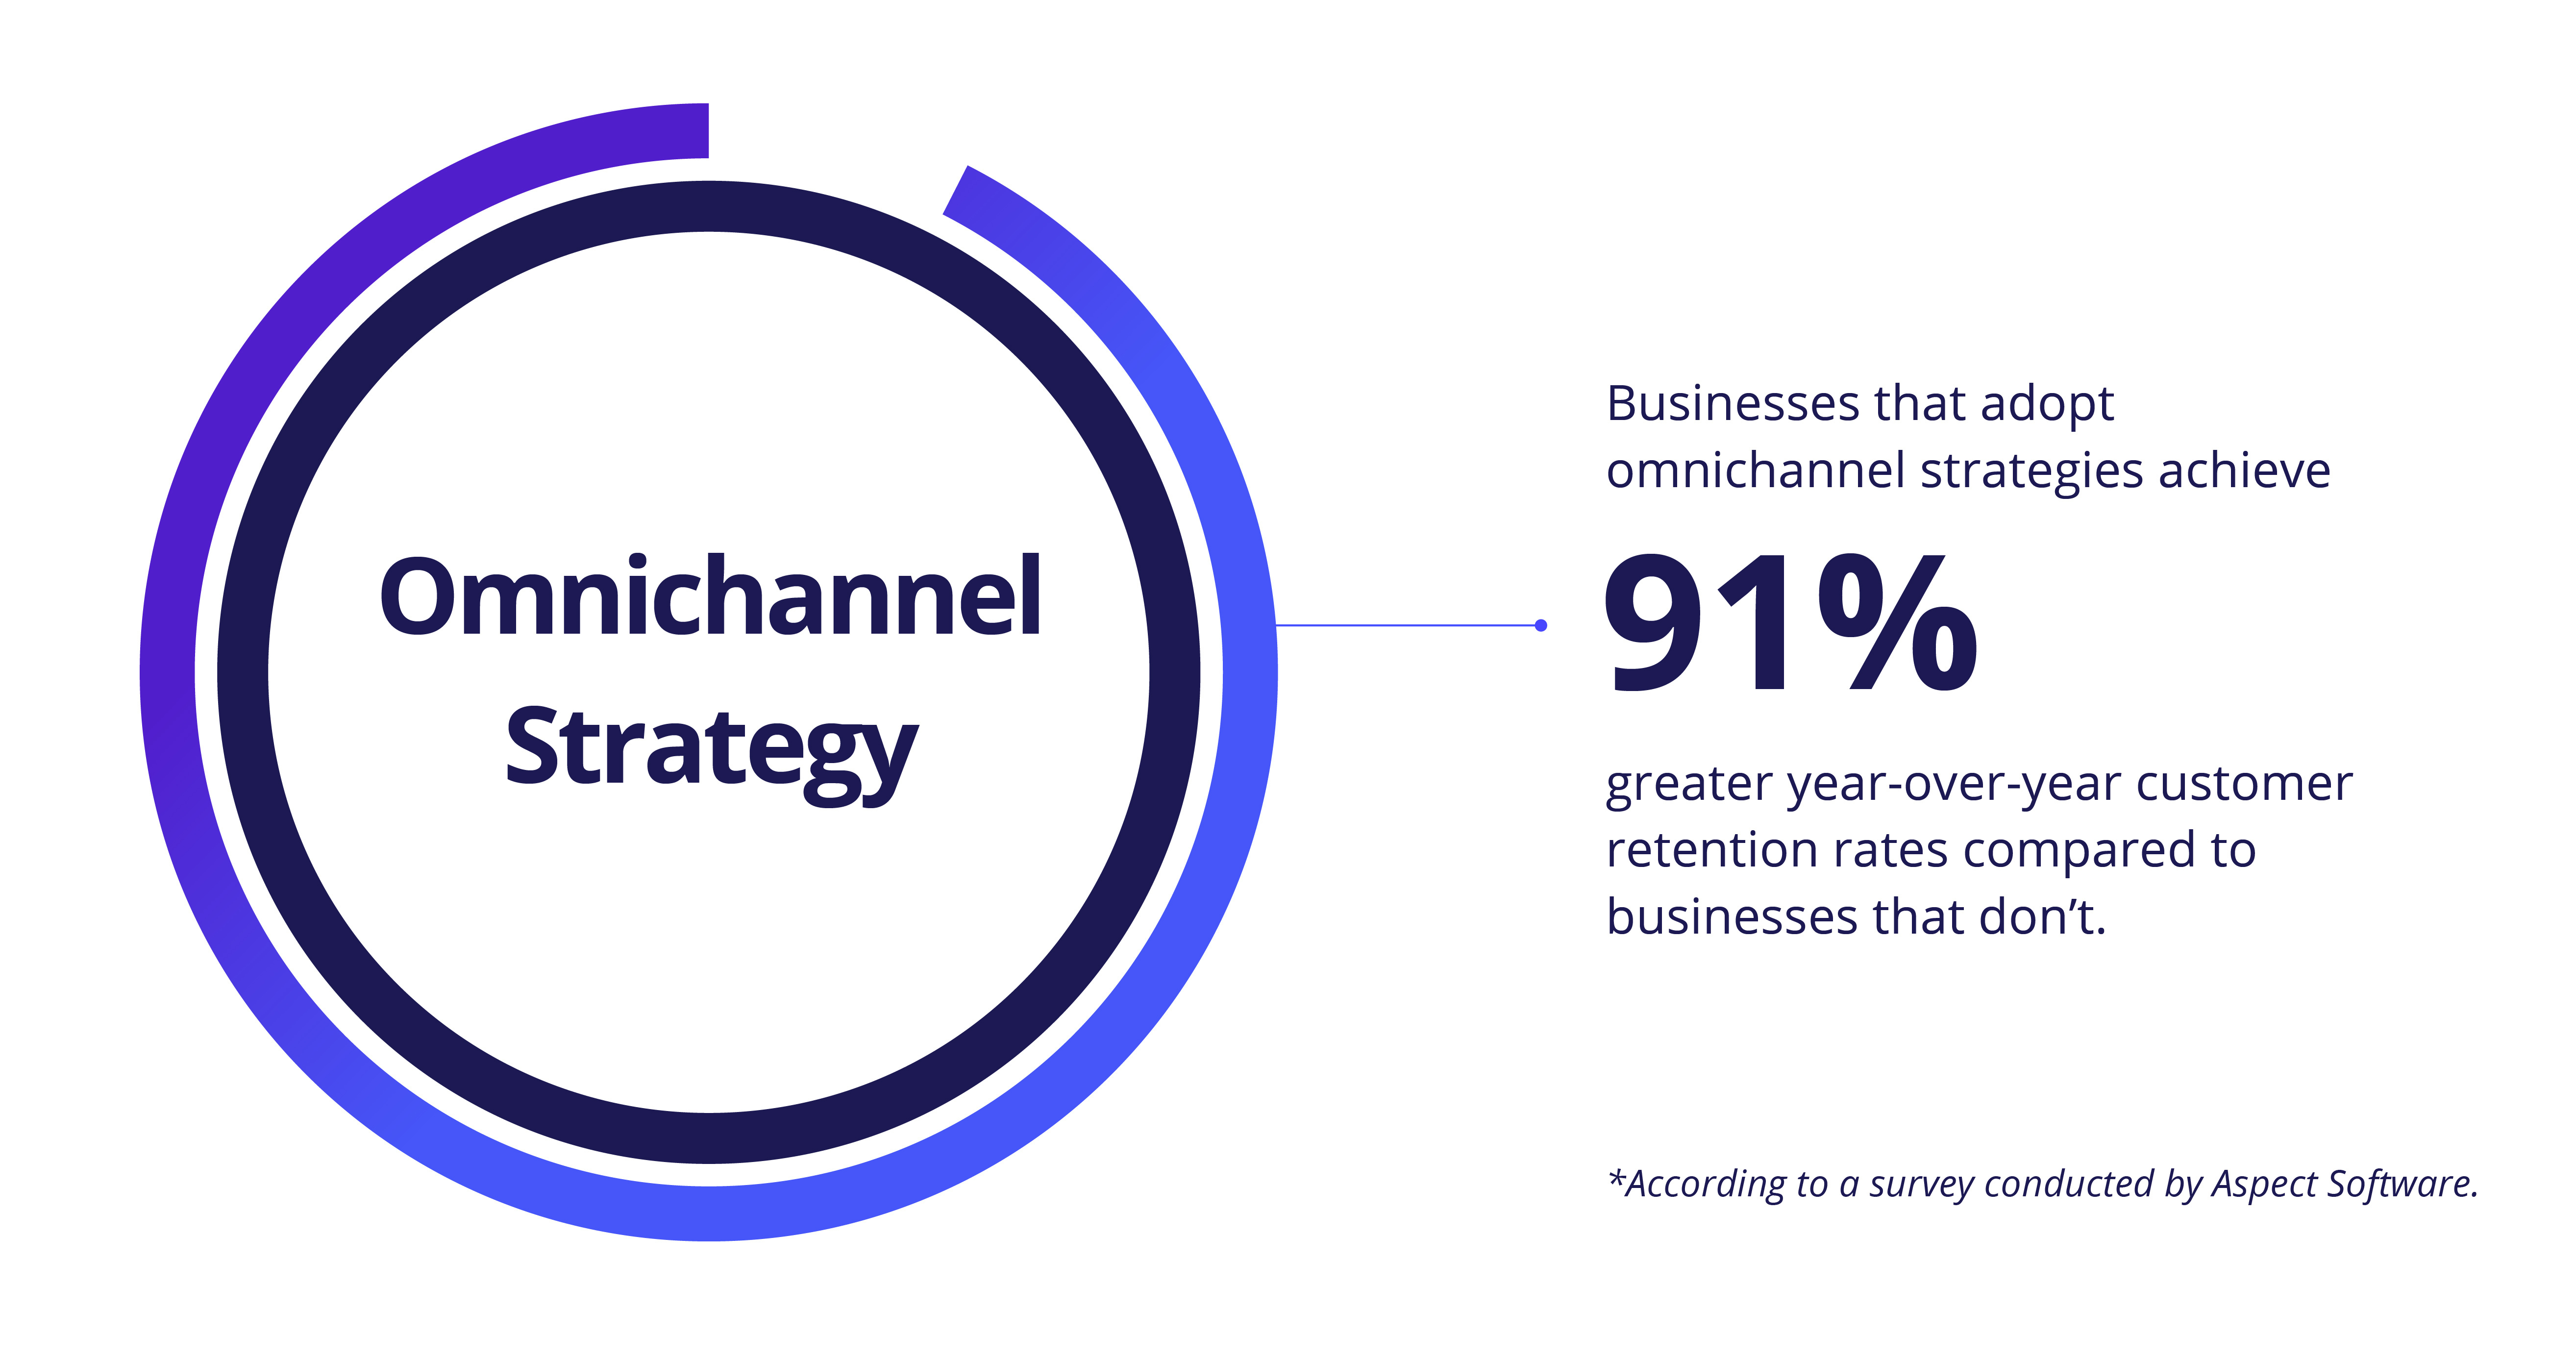 Omnichannel Strategy to Increase Inventory Turnover